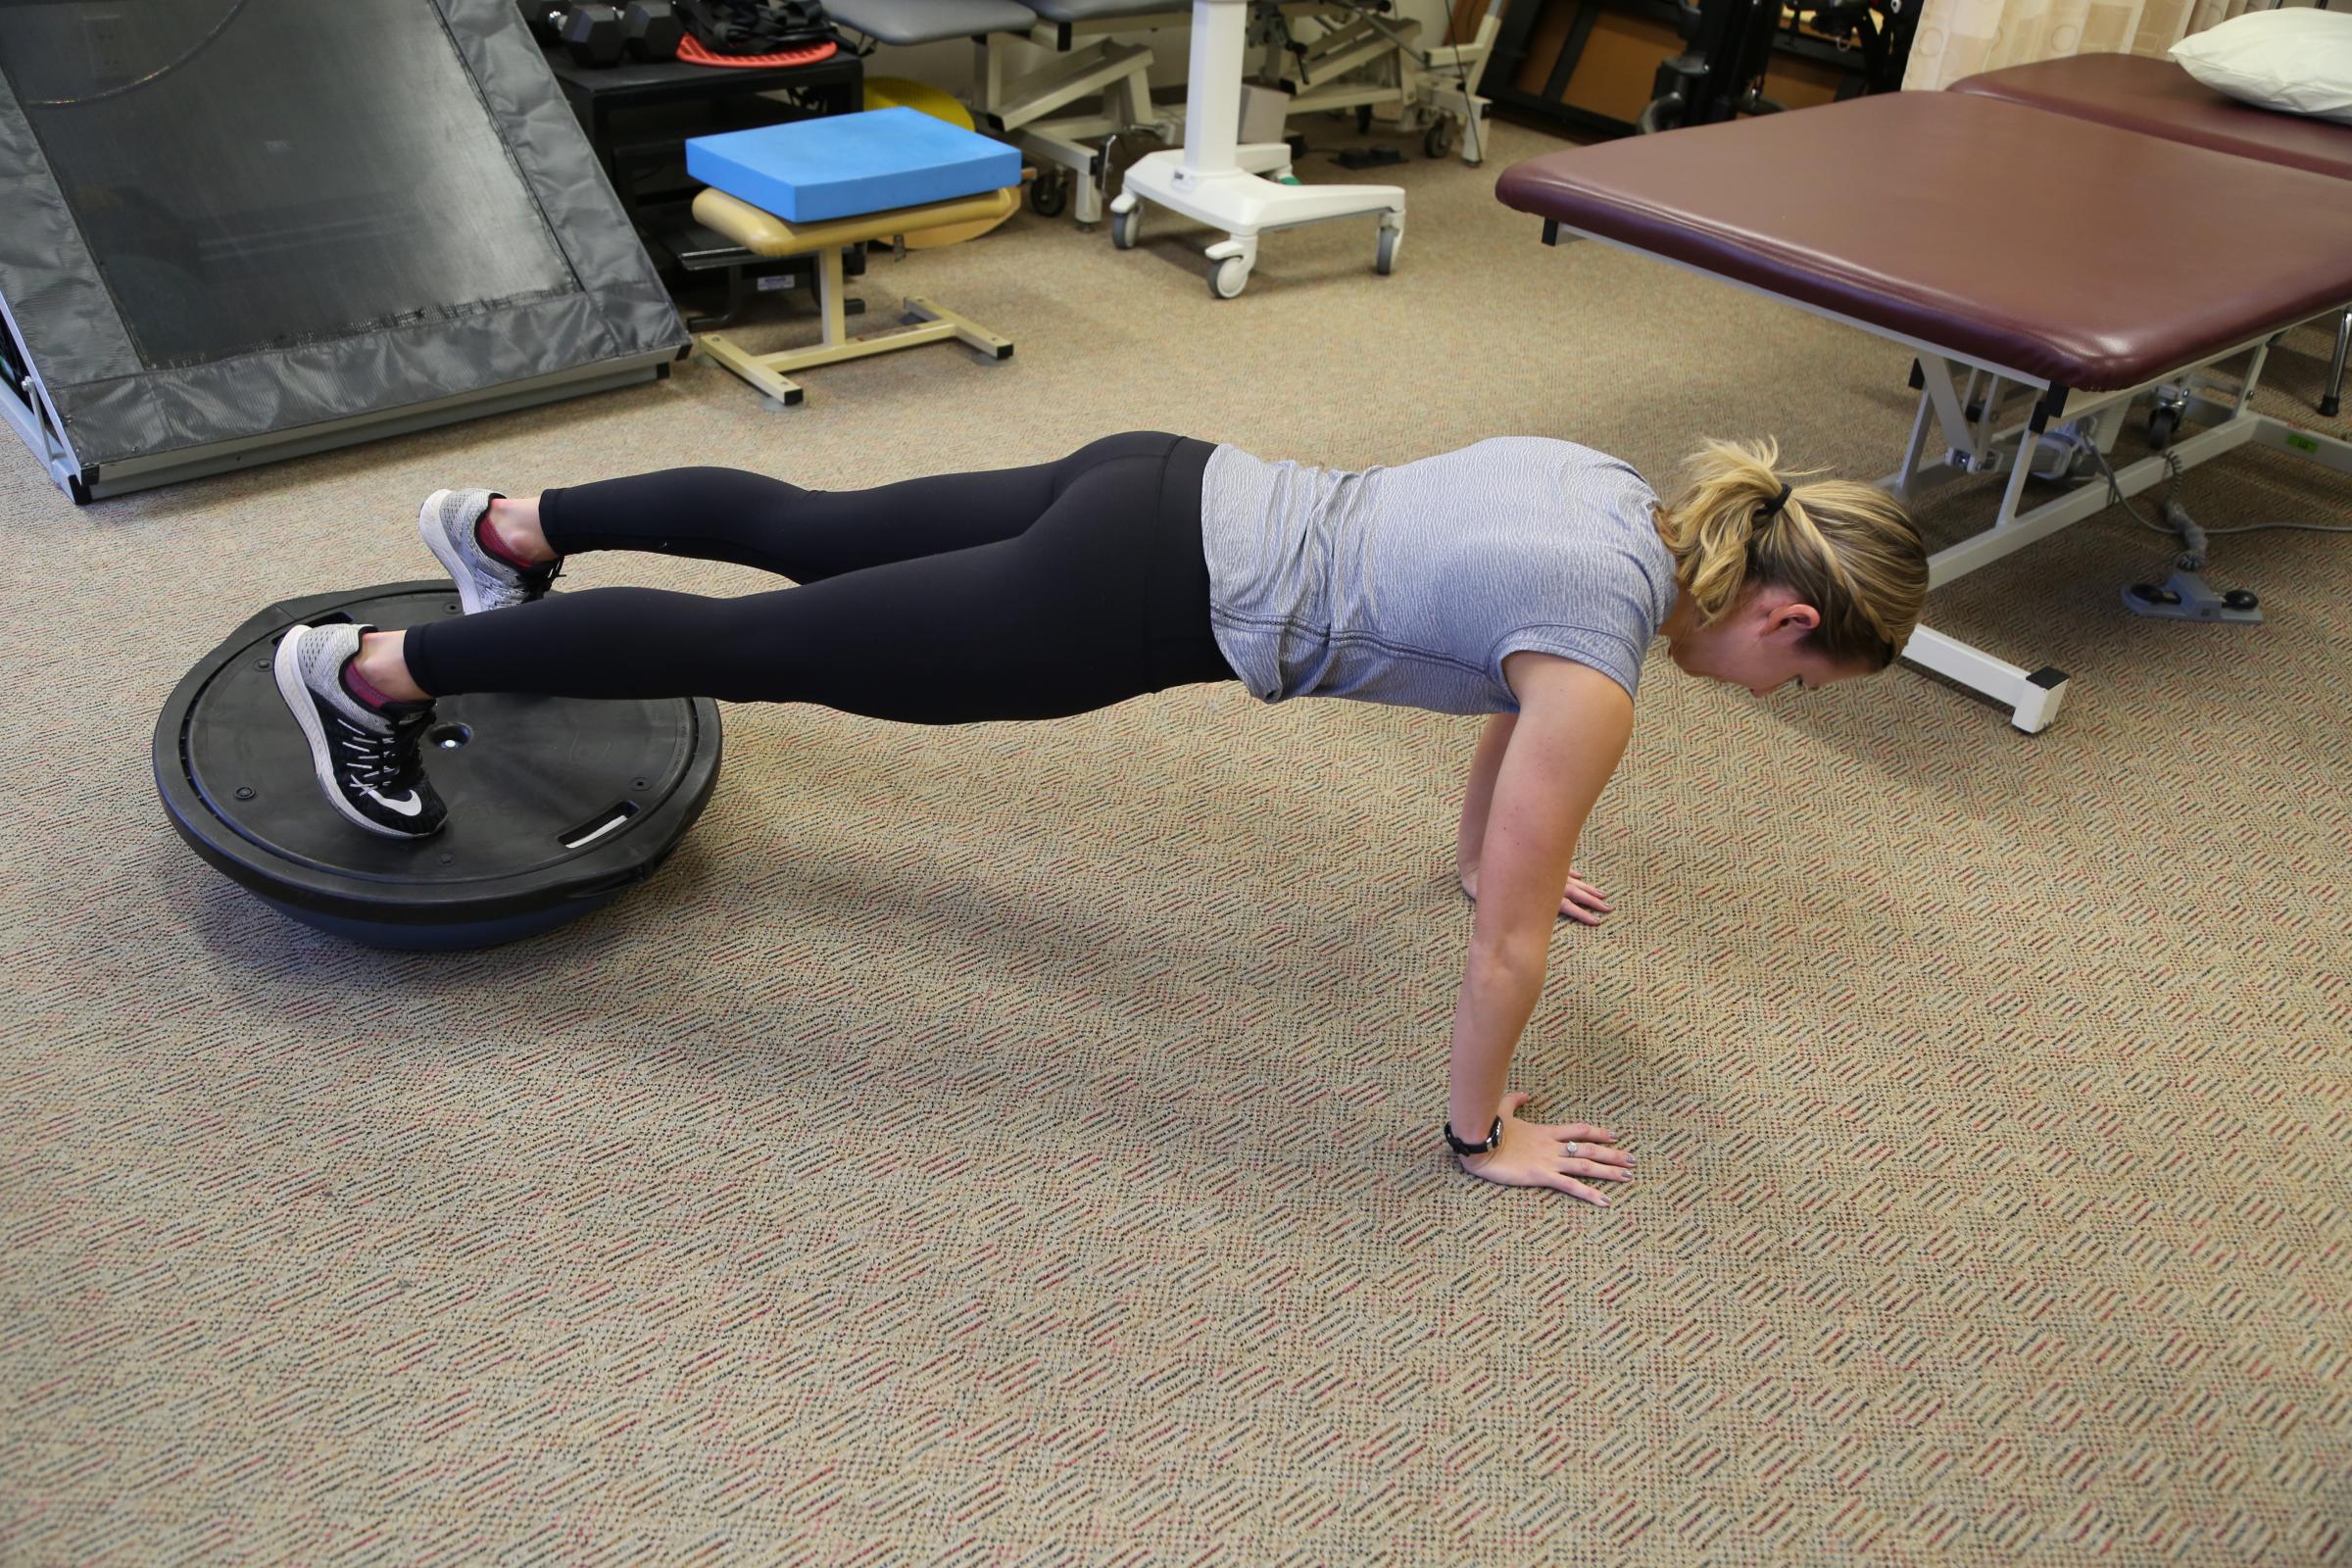 Kayla Borchers performs a plank on a Bosu ball. Stabilizing your body on an unstable surface is an effective way to strengthen the deep core muscles. New research finds that these muscles are commonly weak in runners, which often causes back pain.